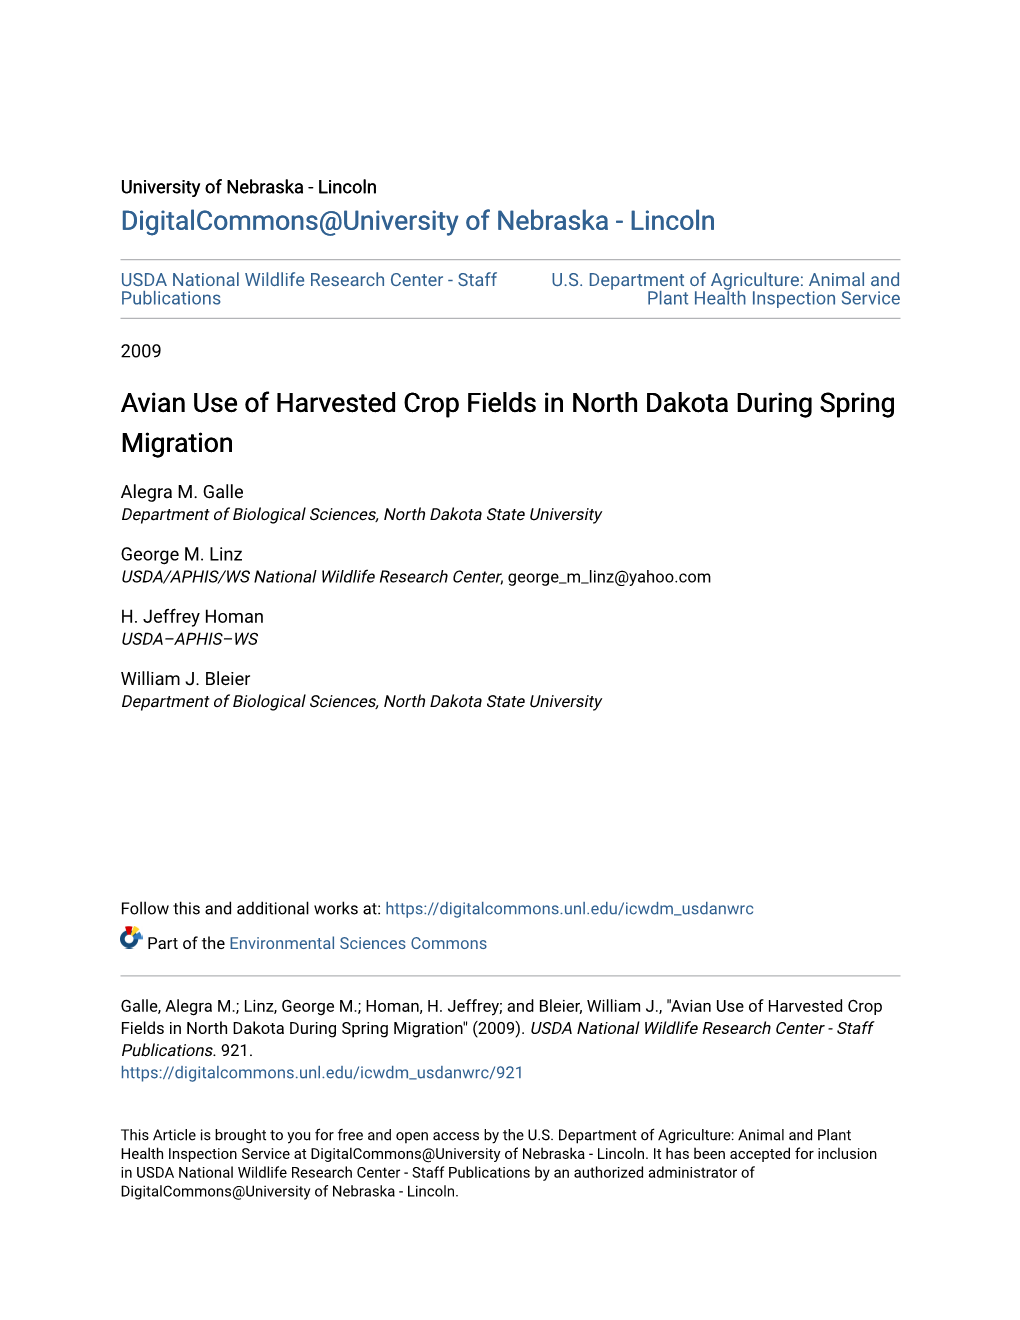 Avian Use of Harvested Crop Fields in North Dakota During Spring Migration